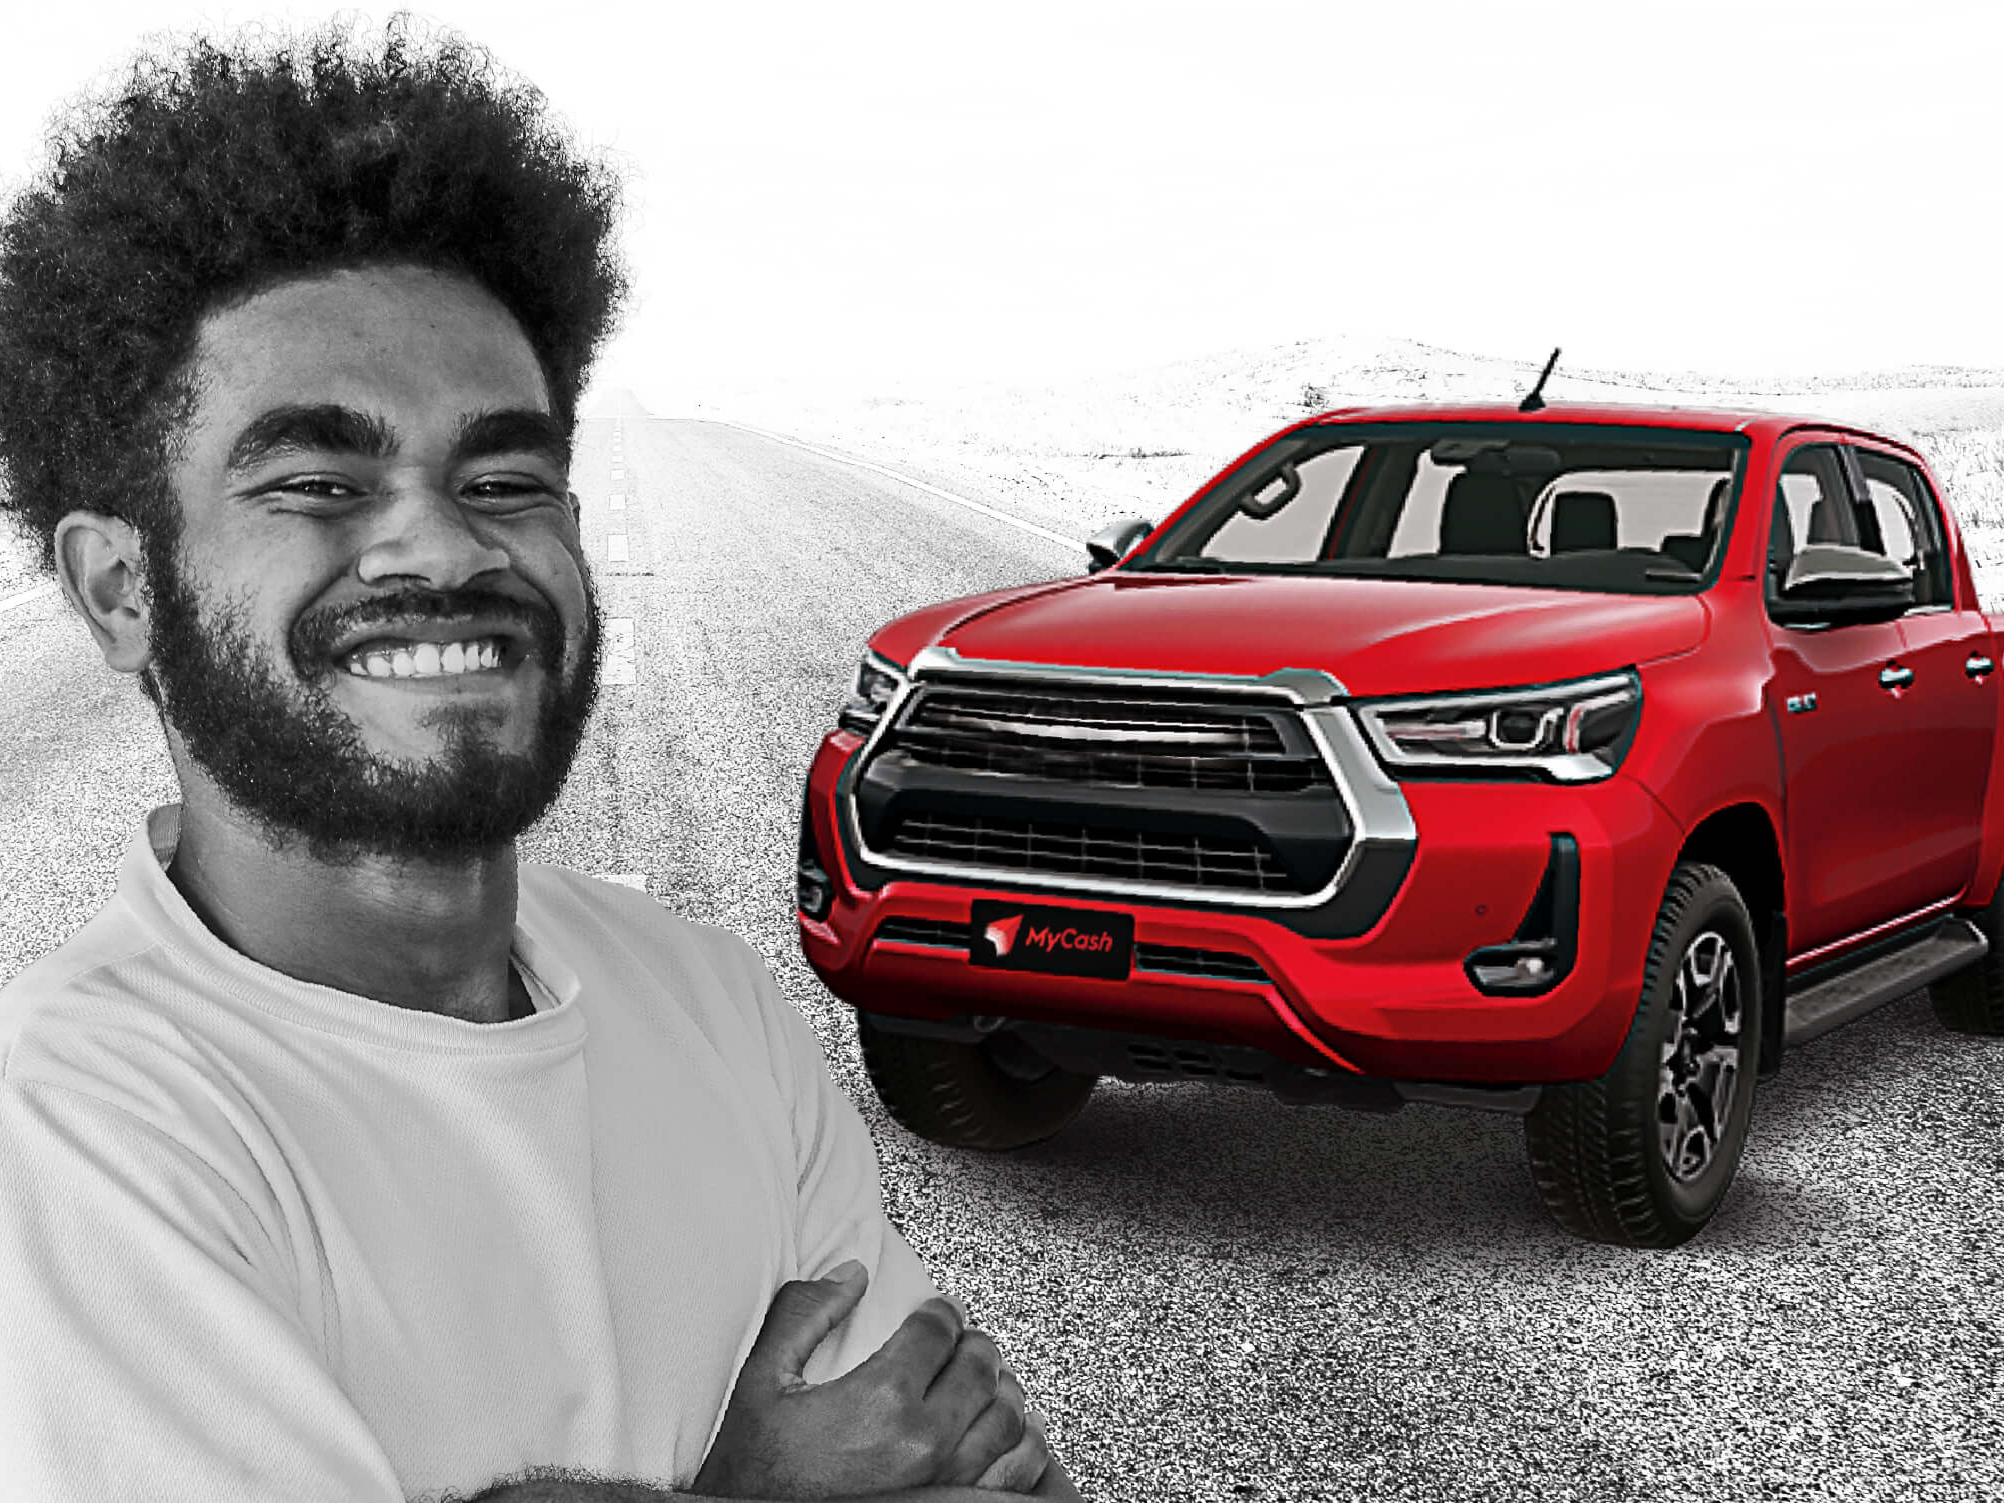 A man smiling on the left, with a red SUV on the right